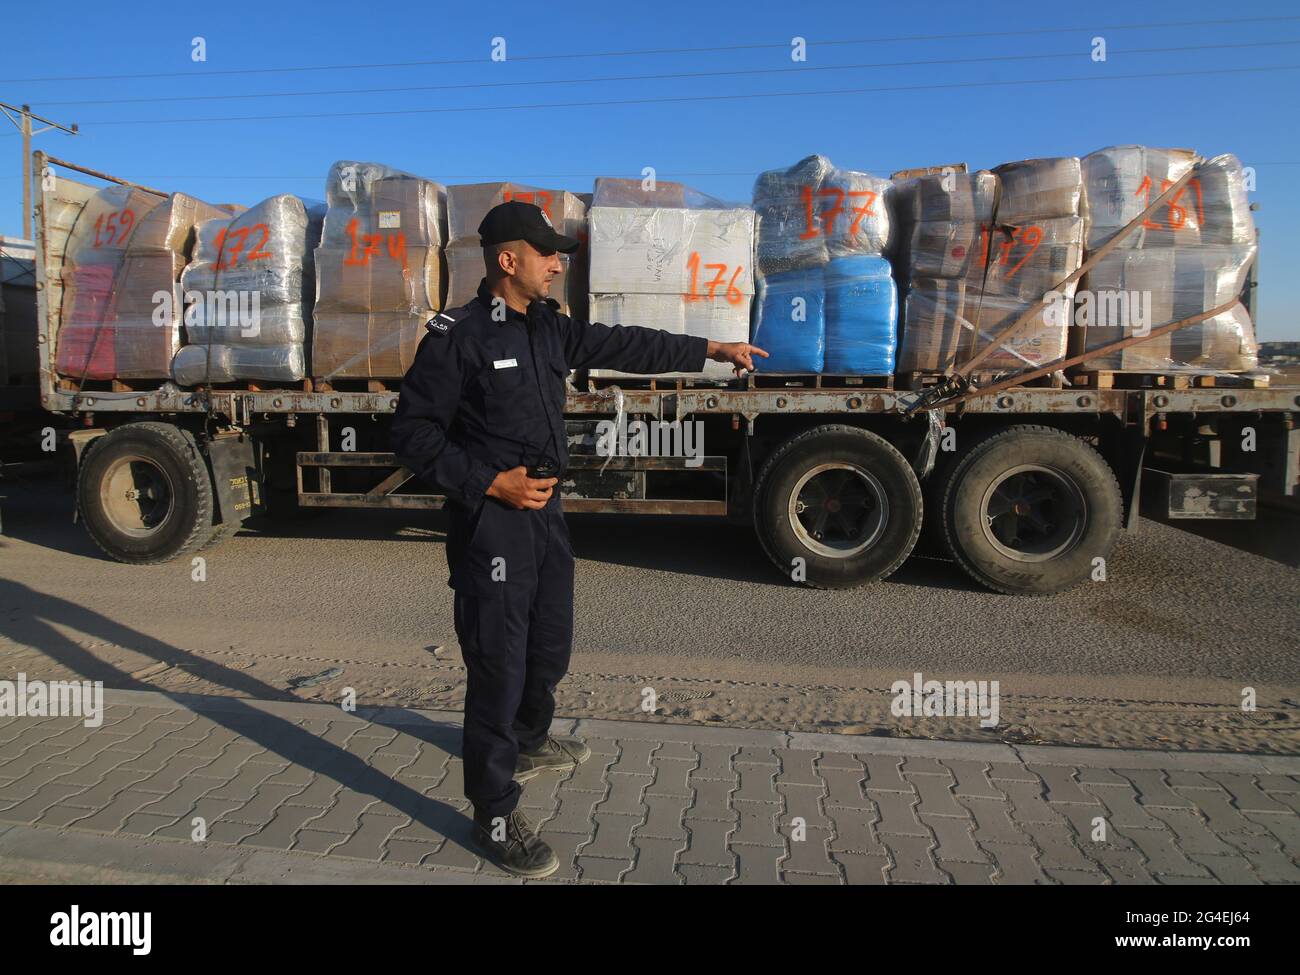 (210621) -- RAFAH, June 21, 2021 (Xinhua) -- A Palestinian police officer gestures as a truck loaded with clothes for export passes through the Kerem Shalom Crossing in the southern Gaza Strip city of Rafah, on June 21, 2021. Israel on Monday eased some restrictions imposed on the Gaza Strip crossings. (Photo by Khaled Omar/Xinhua) Stock Photo